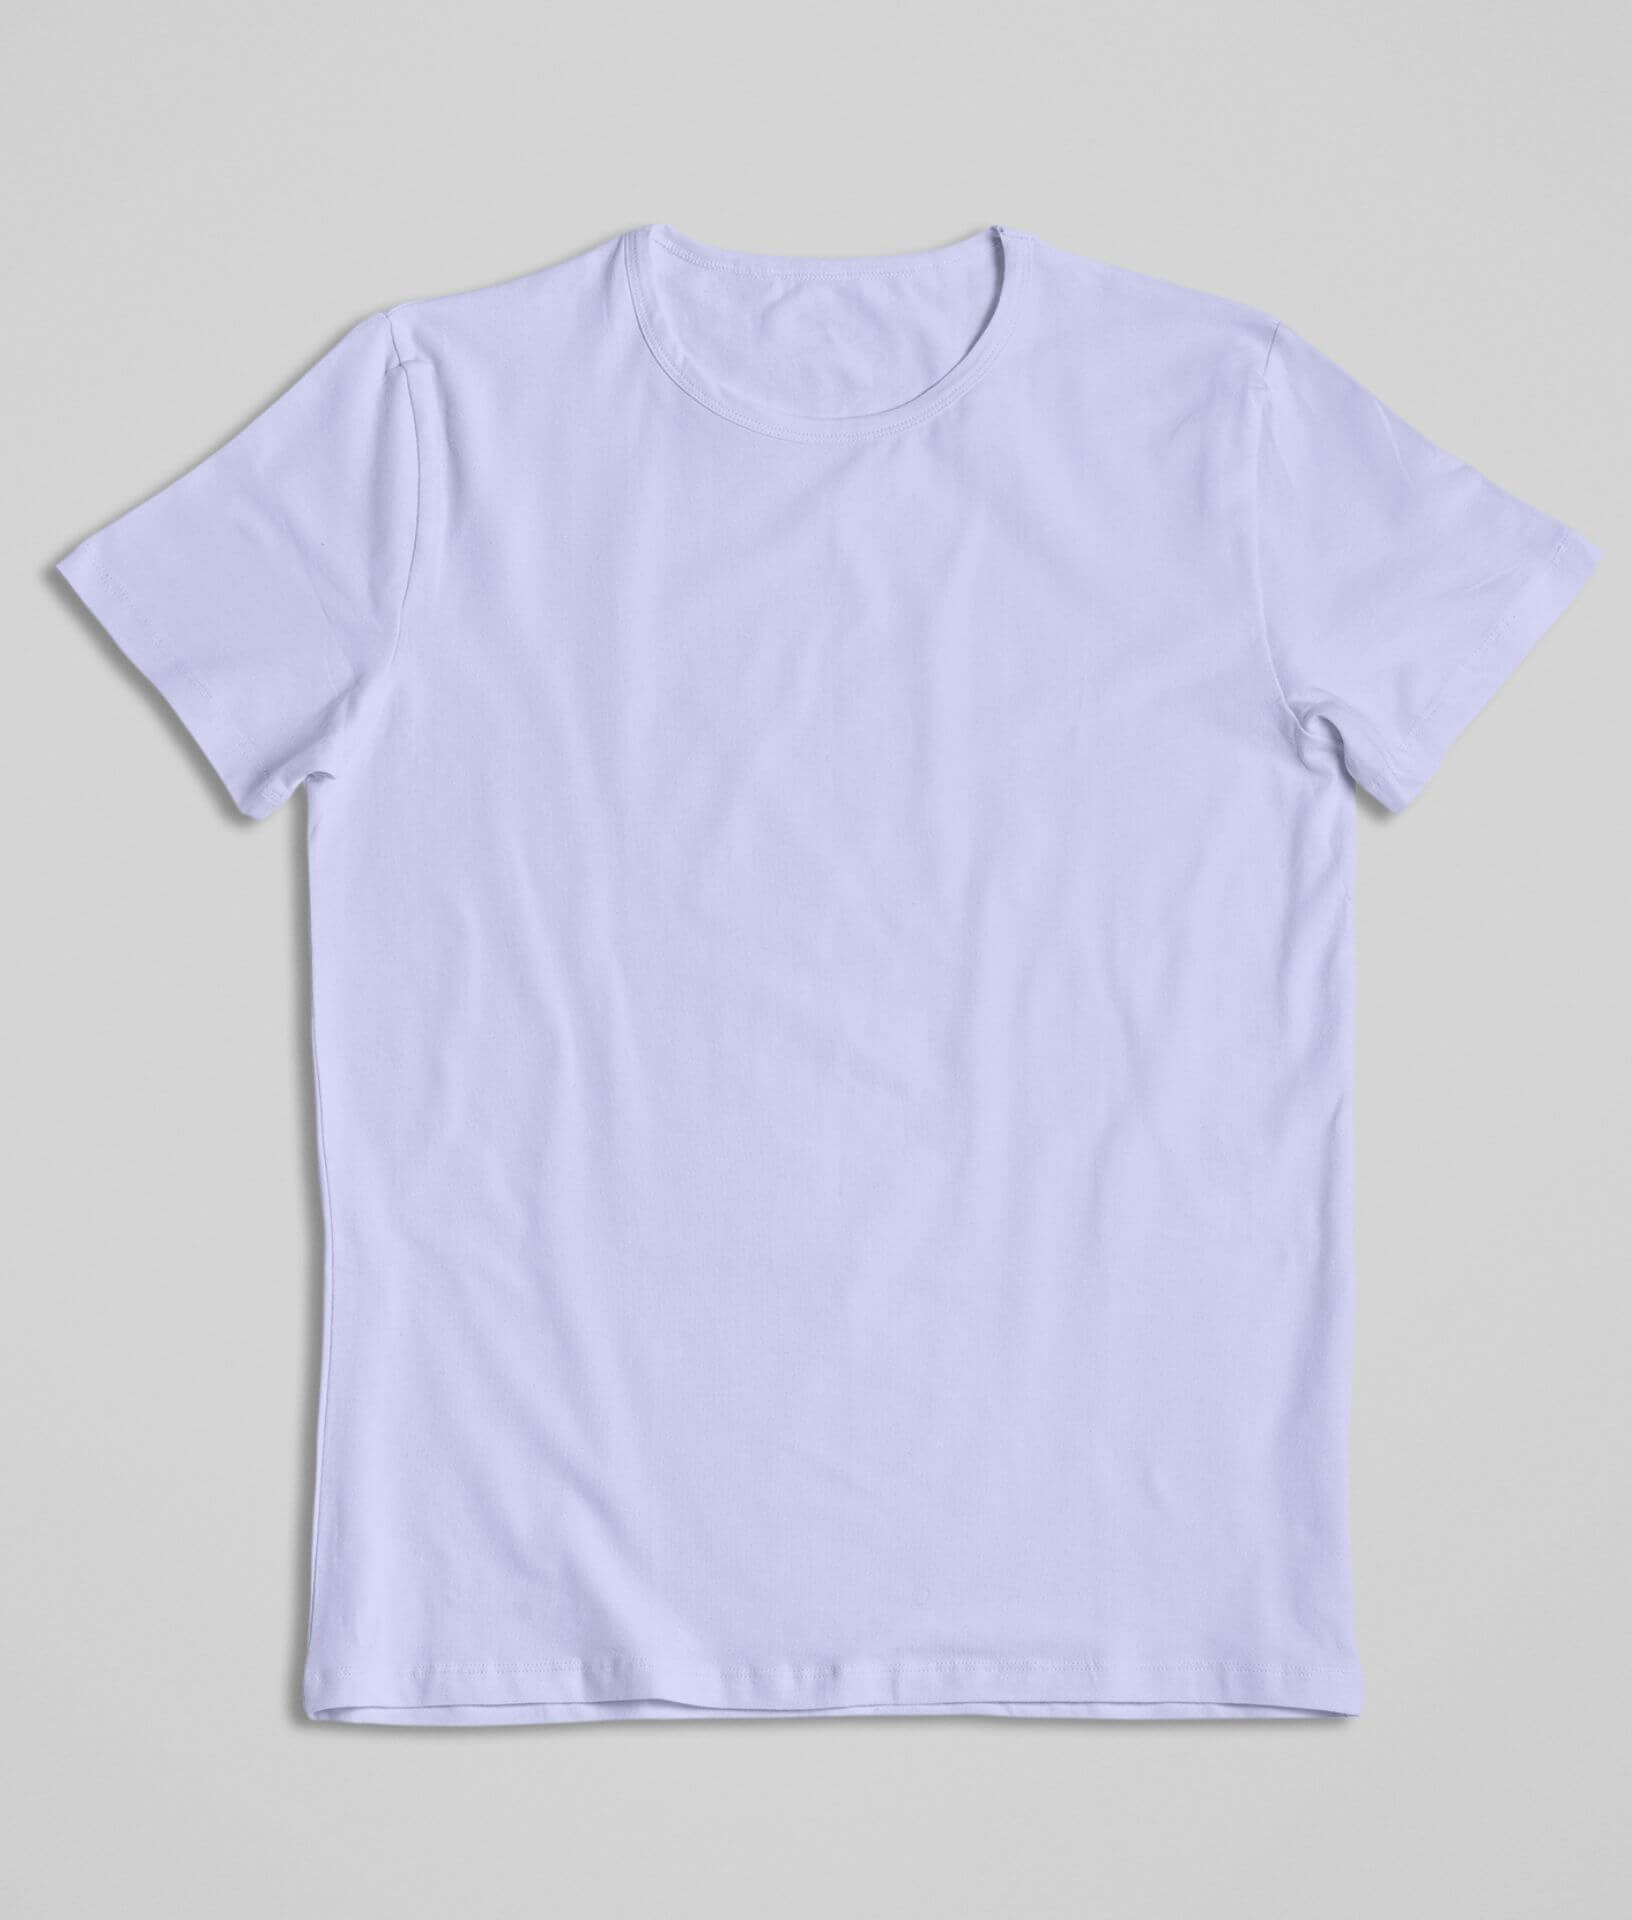 TEXT PRINT WASHED T-SHIRT - Blue / Lavender